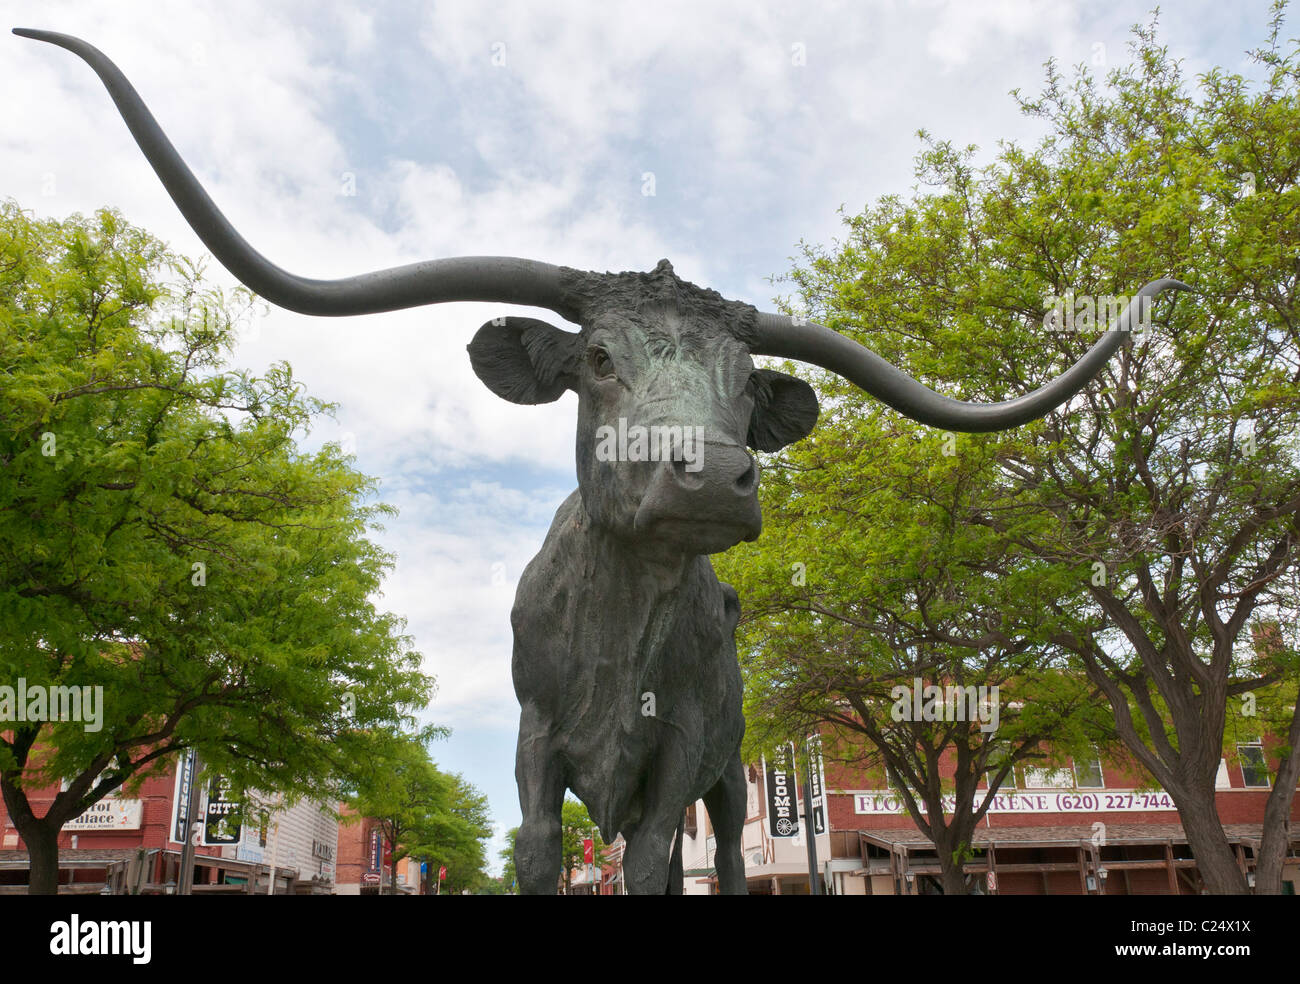 Kansas, Dodge City, Texas Longhorn Statue, commemorates the 1800's cattle drives from Texas to the Kansas railroads Stock Photo